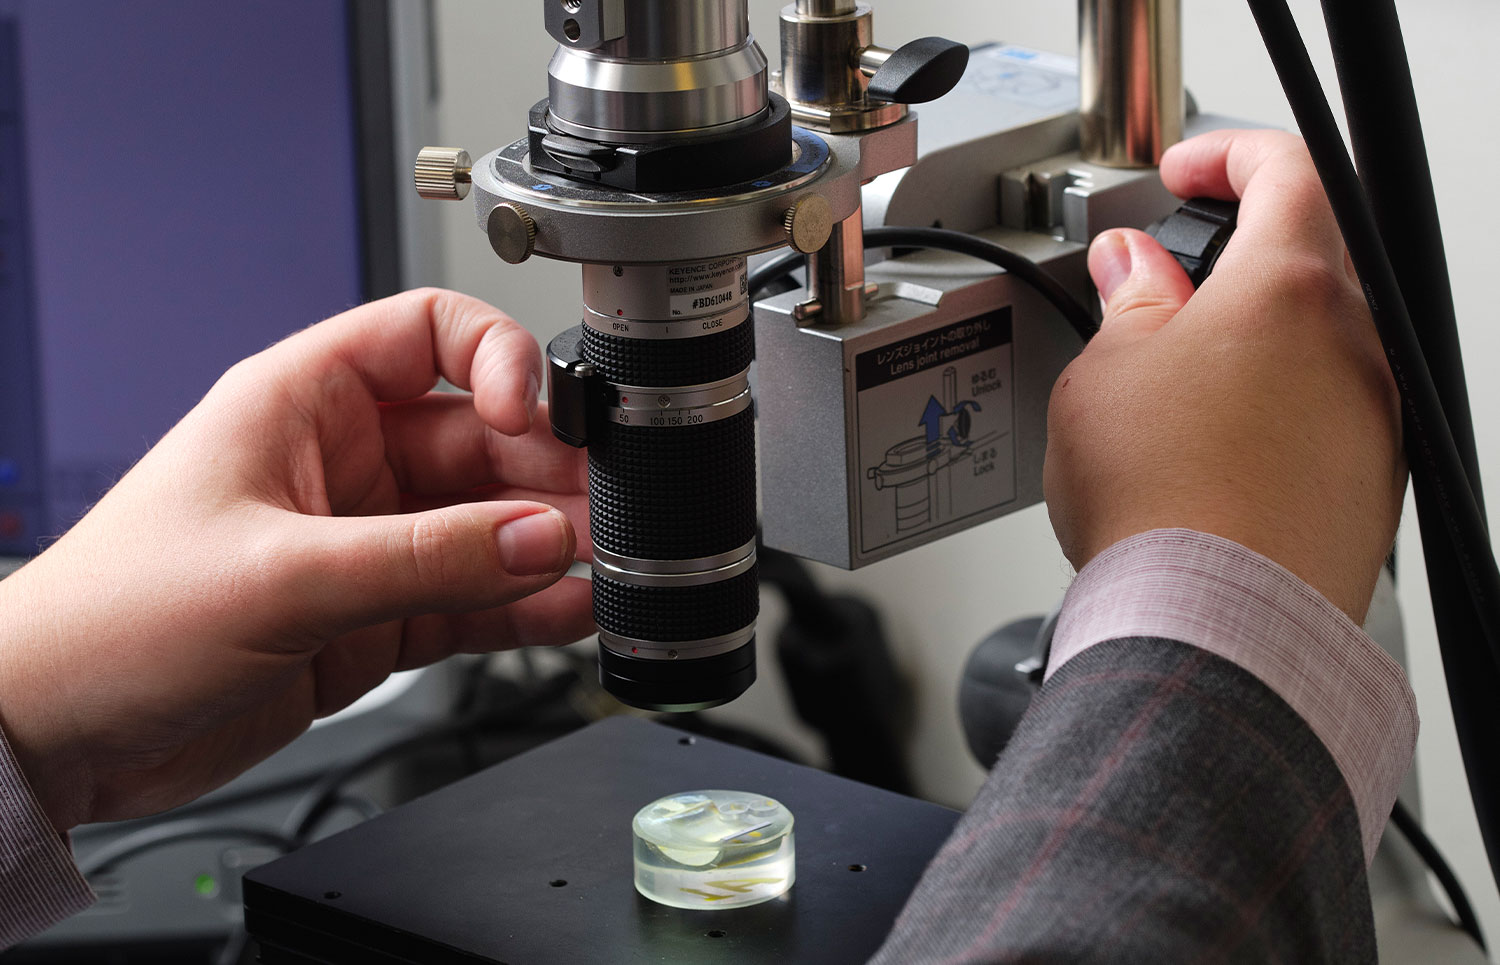 UT Student Looks at Material Under Microscrope at ARC Lab